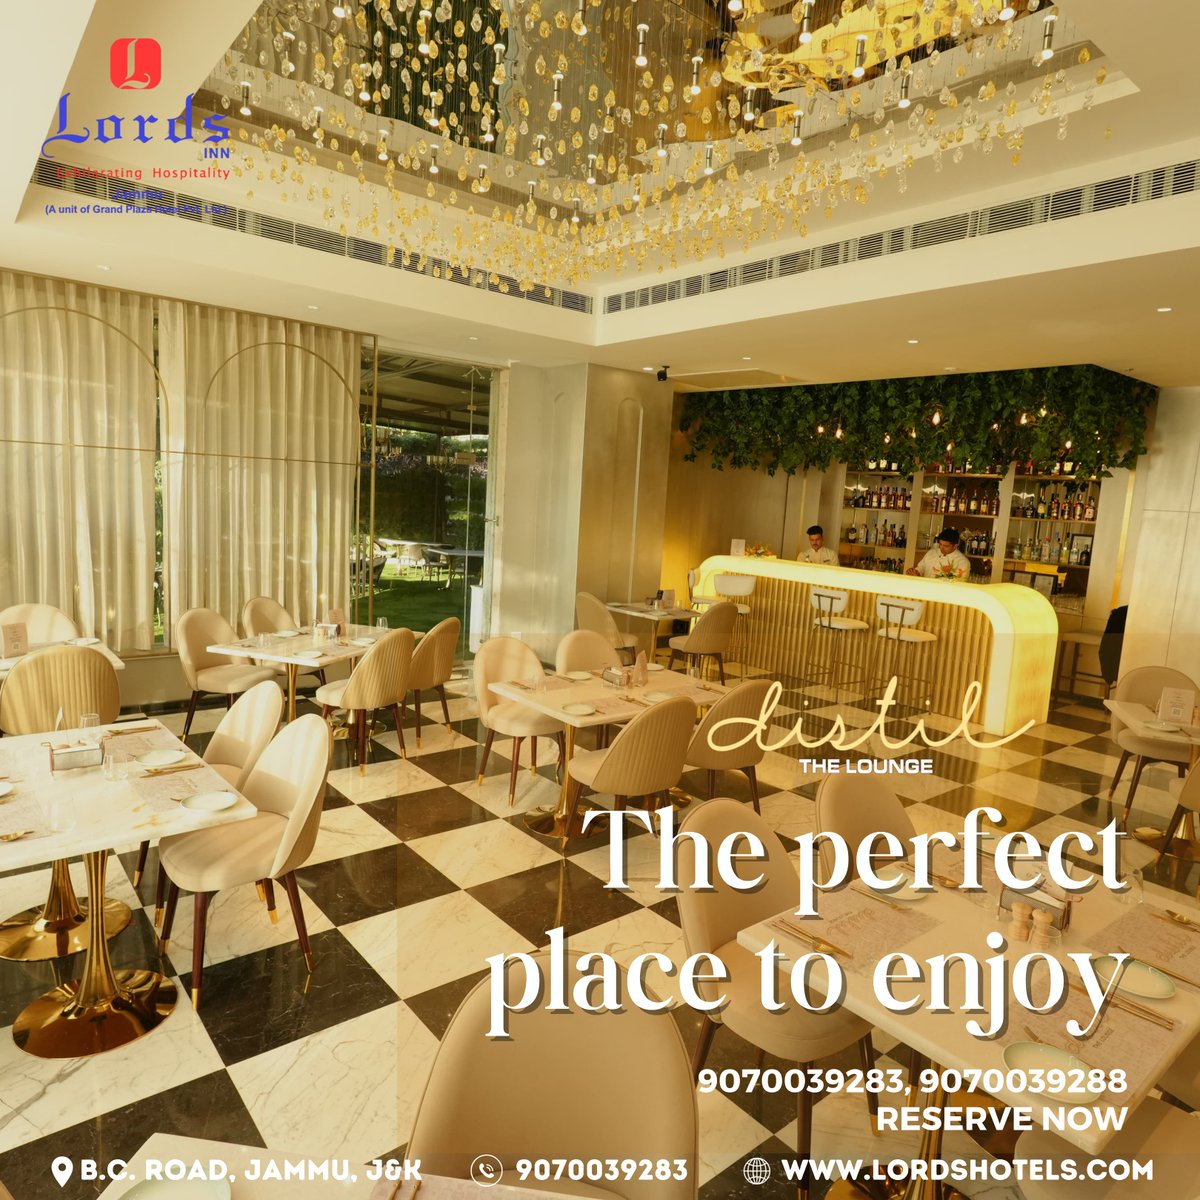 “Distil The Lounge : The perfect place to enjoy”.
.
Location📷 : B.C Road, Near Bus Stand , Jammu 180001
.
Connect with us for Bookings  :  9070039283, 9070039288
.
#Distillthelounge #sipsavorenjoy #lounge #craftcocktails #chillvibes #sipinsytle #drinks #lordsinnjammu